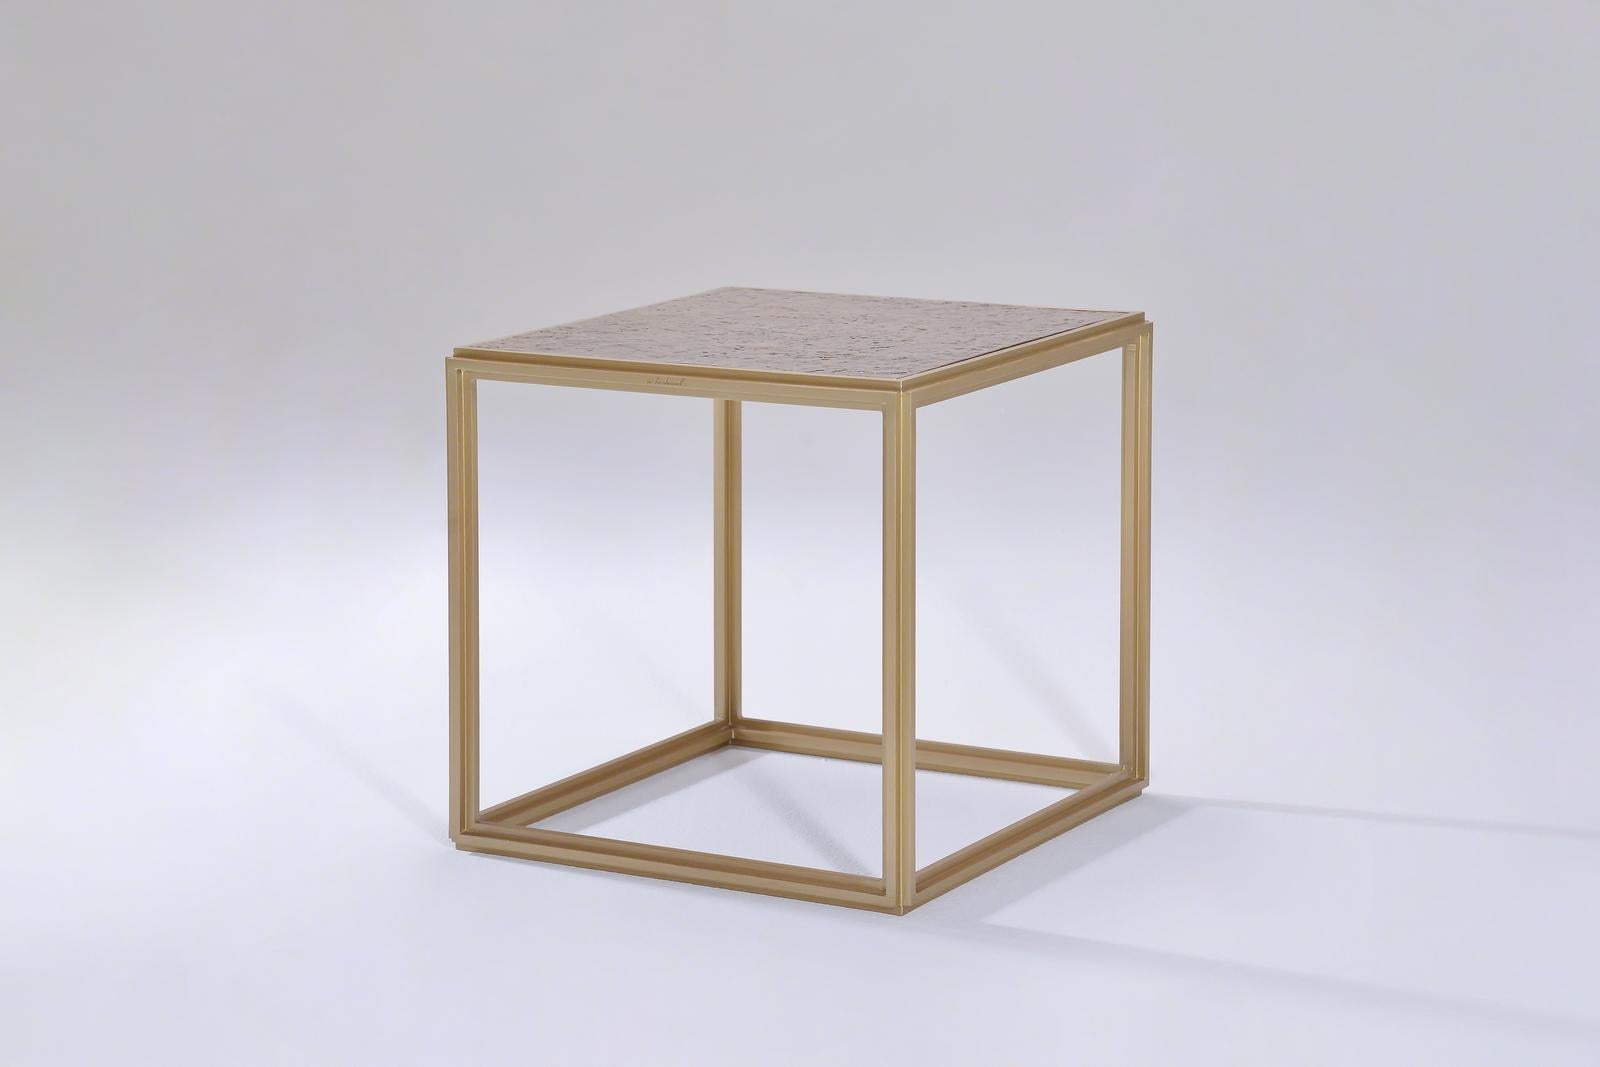 Minimalist Cubist Bronze and Brass Occasional Square Table, by P. Tendercool For Sale